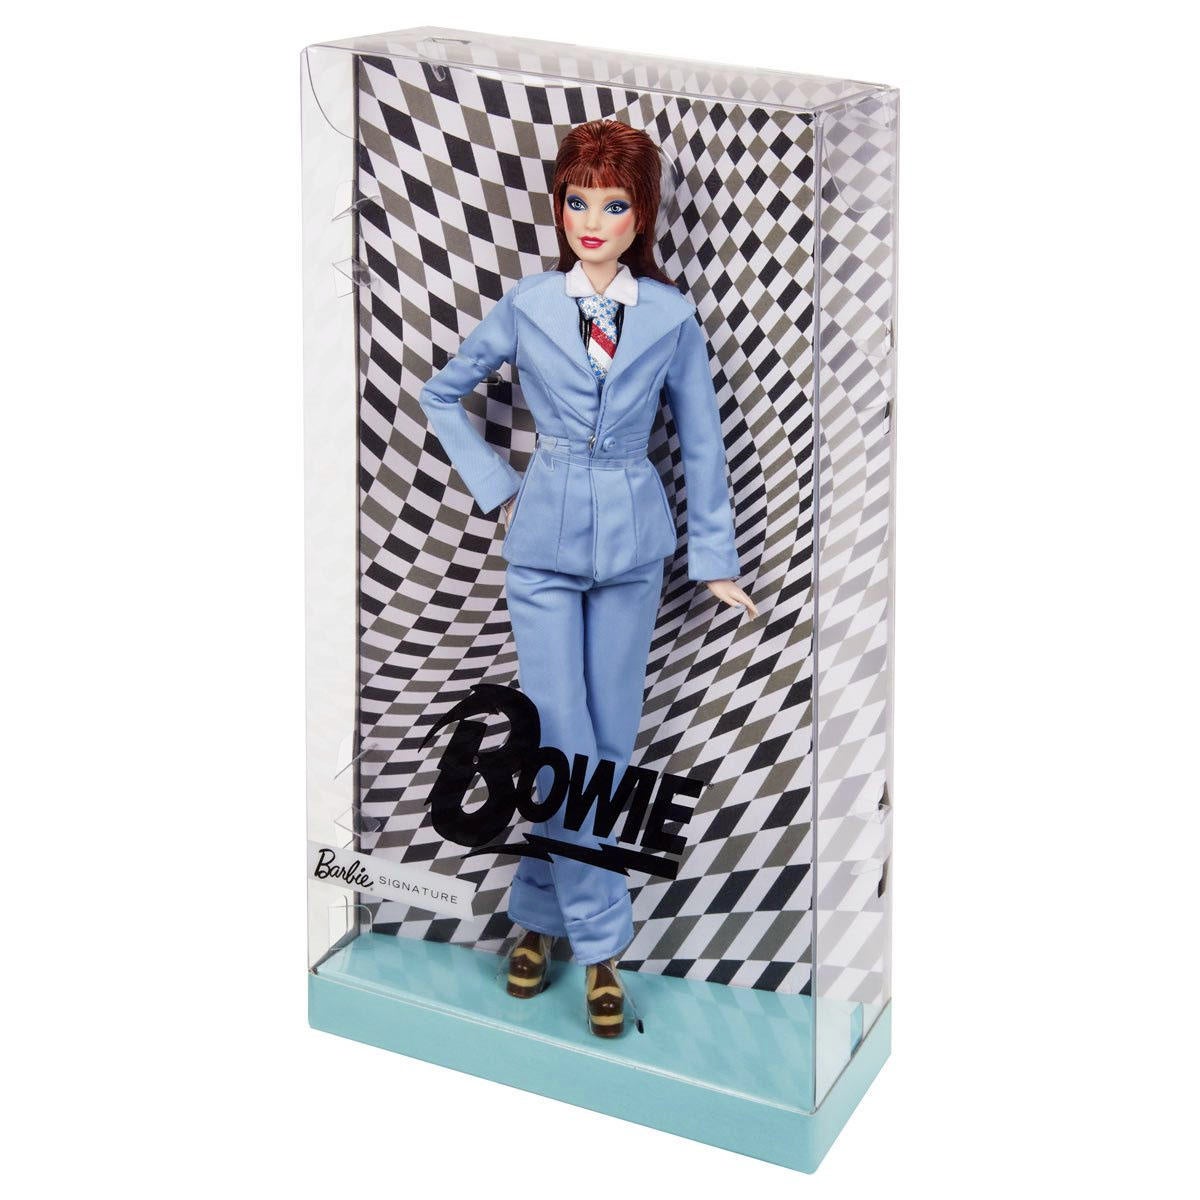 David Bowie Life on Mars Barbie Doll Is up for Pre-Order